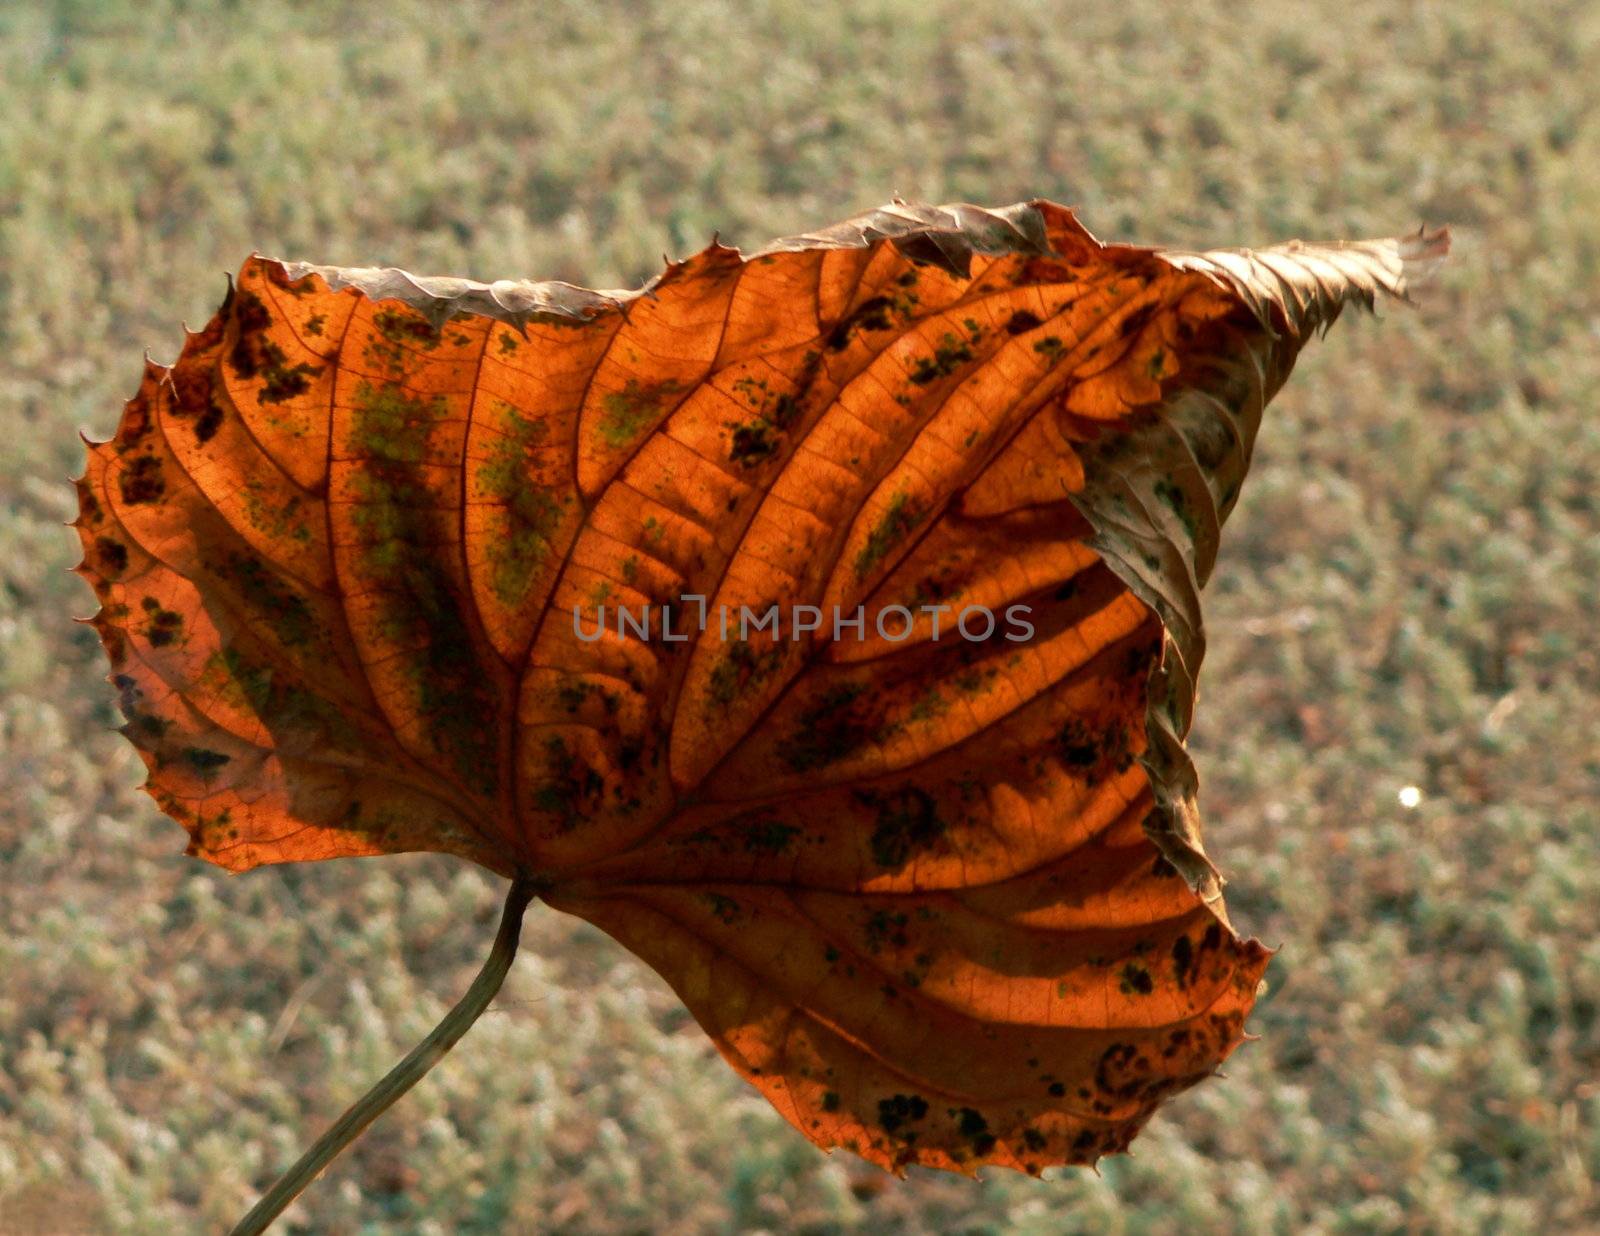 Withered leaf by ichip